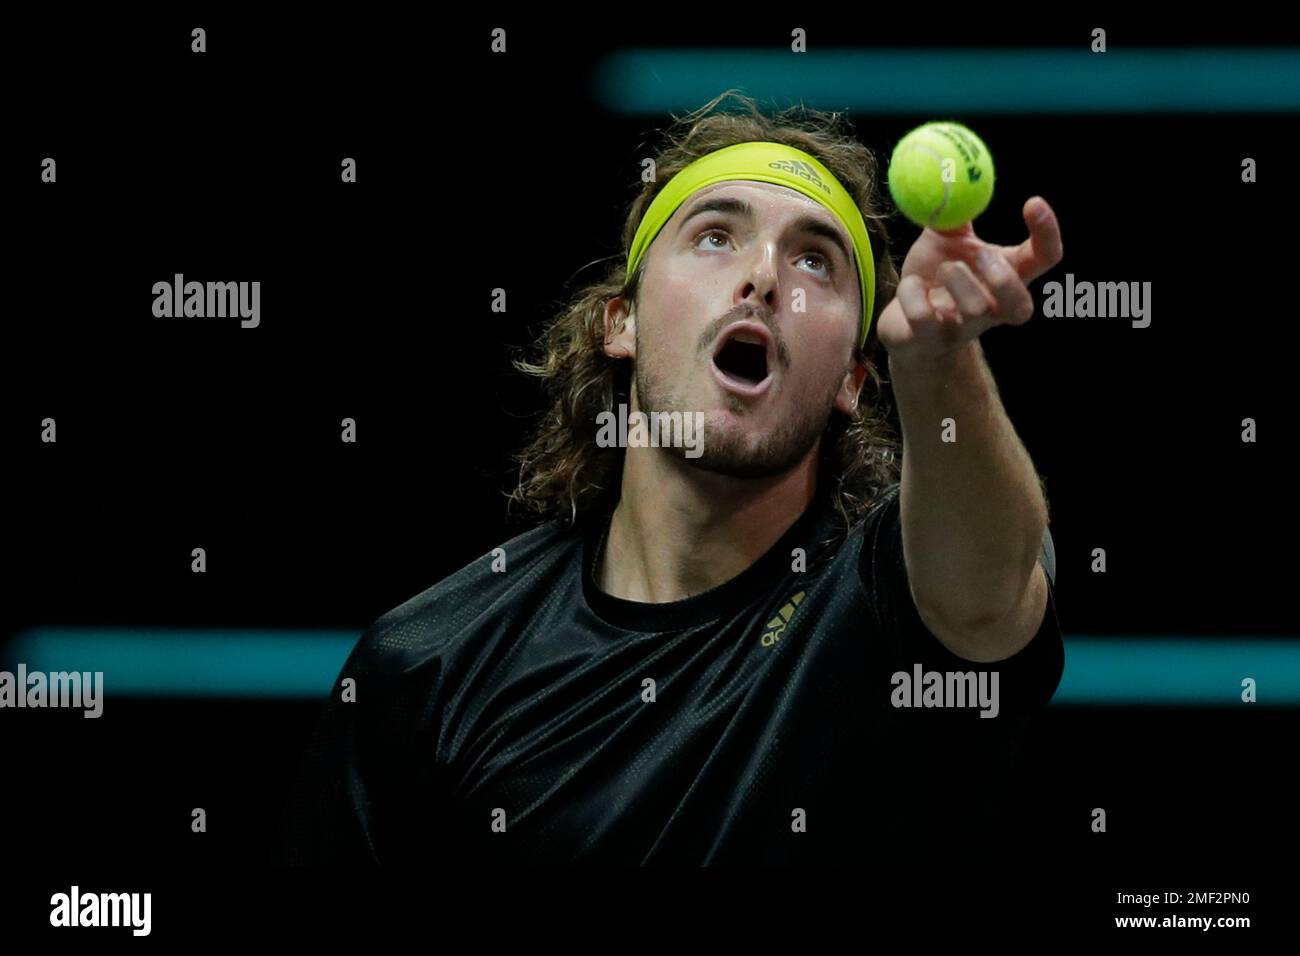 Greeces Stefanos Tsitsipas serves against Egor Gerasimov of Belarus in their first round mens singles match of the ABN AMRO world tennis tournament at Ahoy Arena in Rotterdam, Netherlands, Tuesday, March 2,